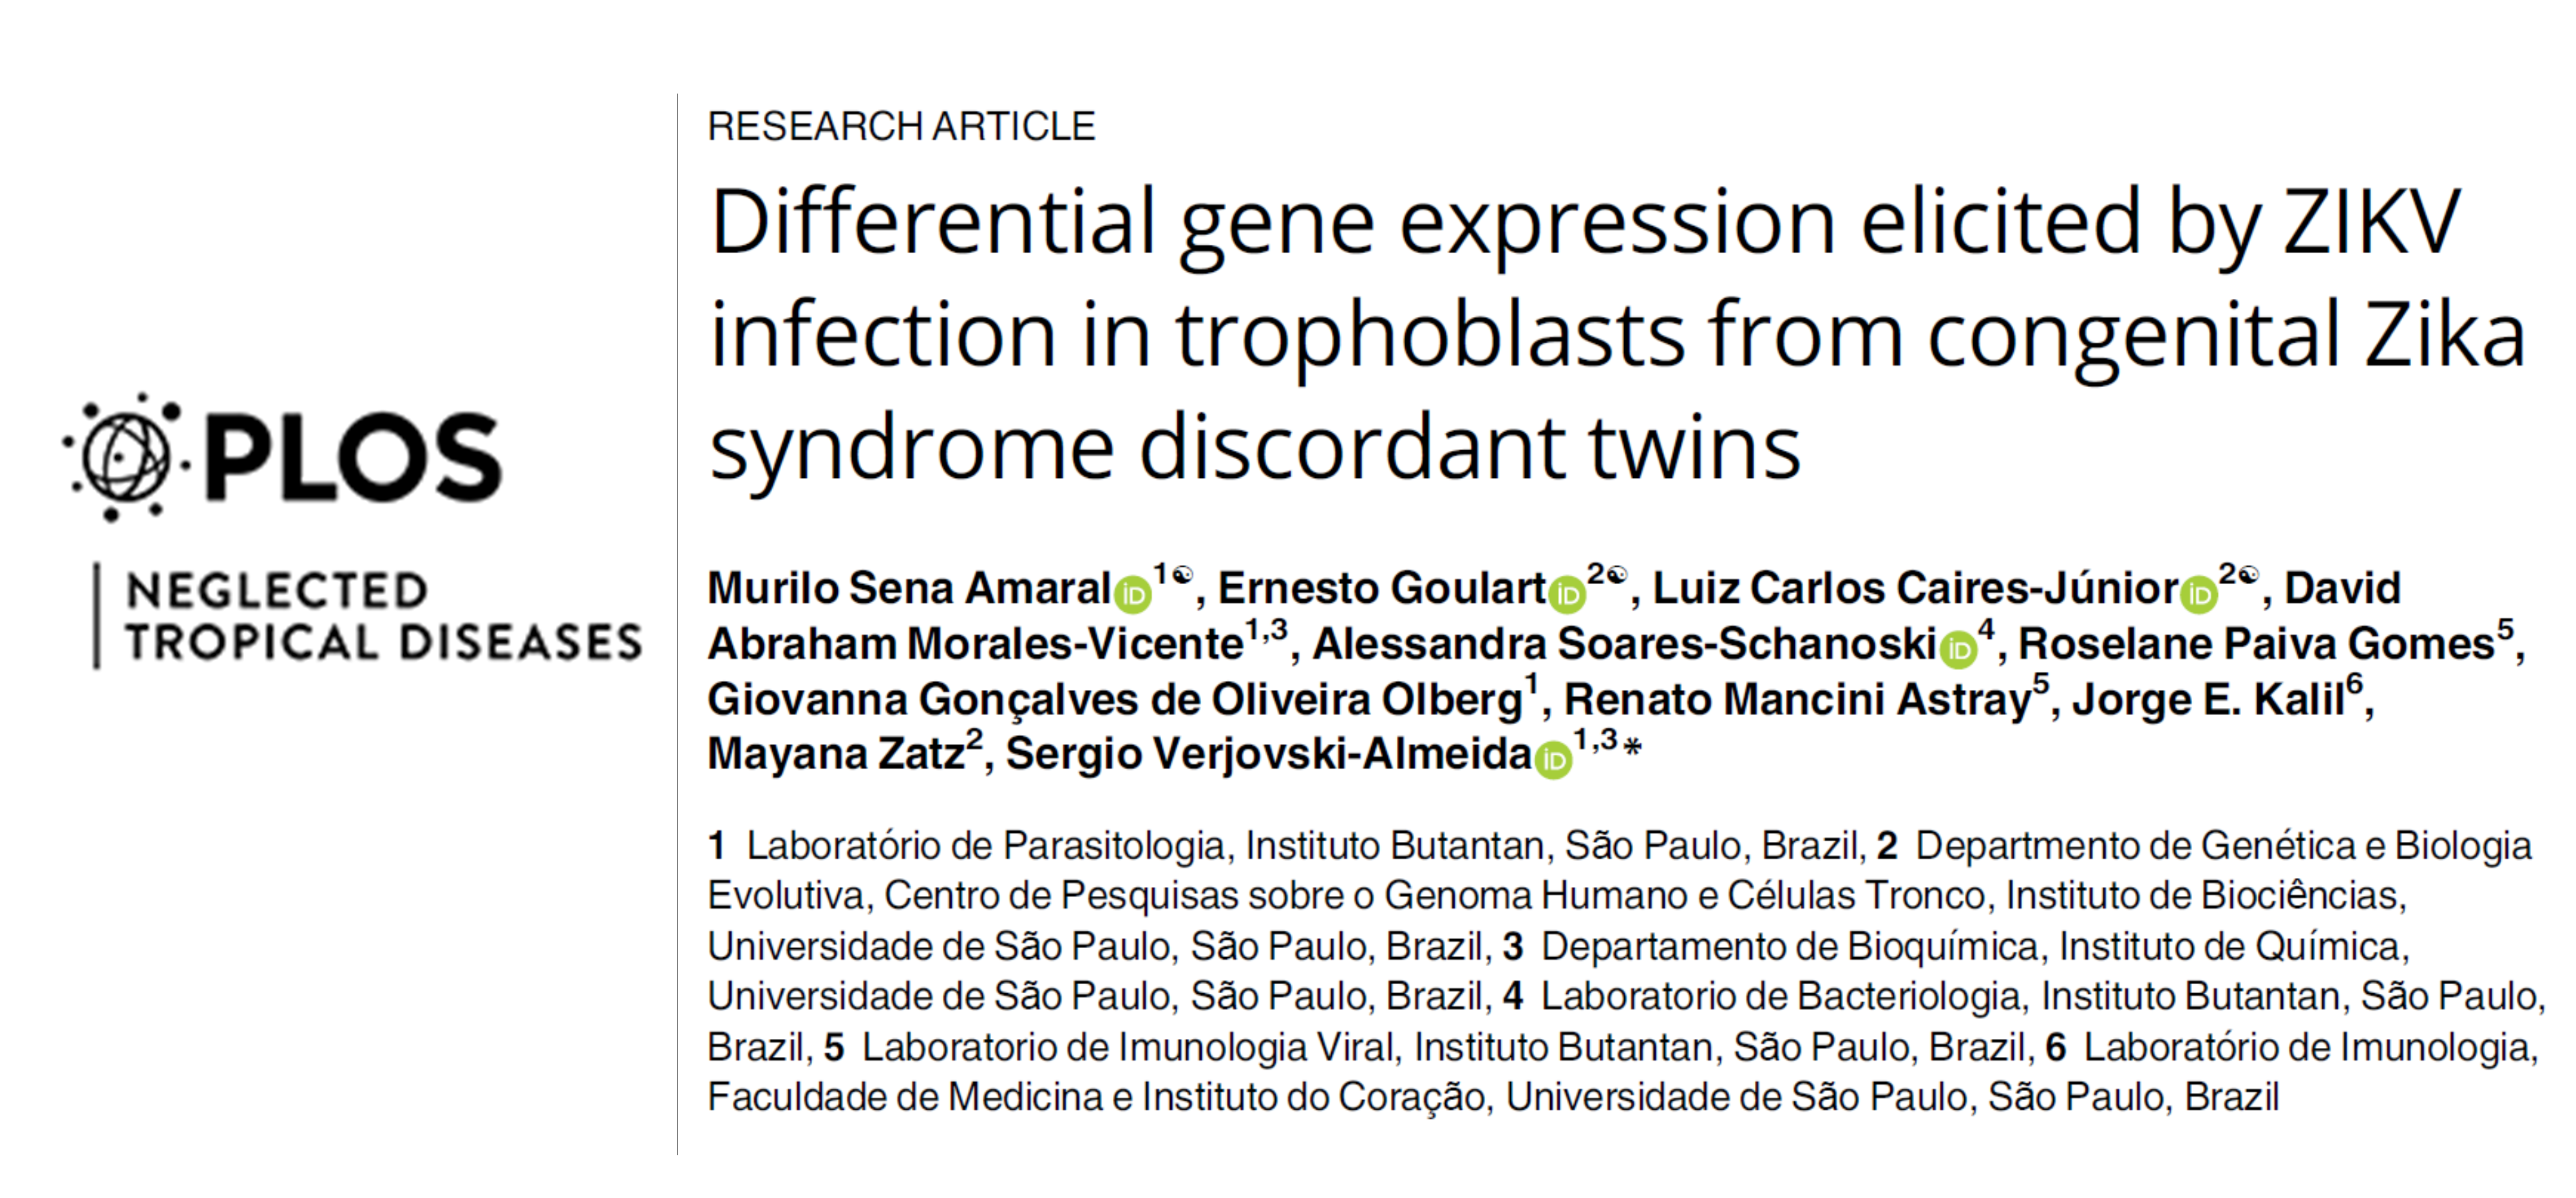 Differential gene expression elicited by ZIKV infection in trophoblasts from congenital Zika syndrome discordant twins